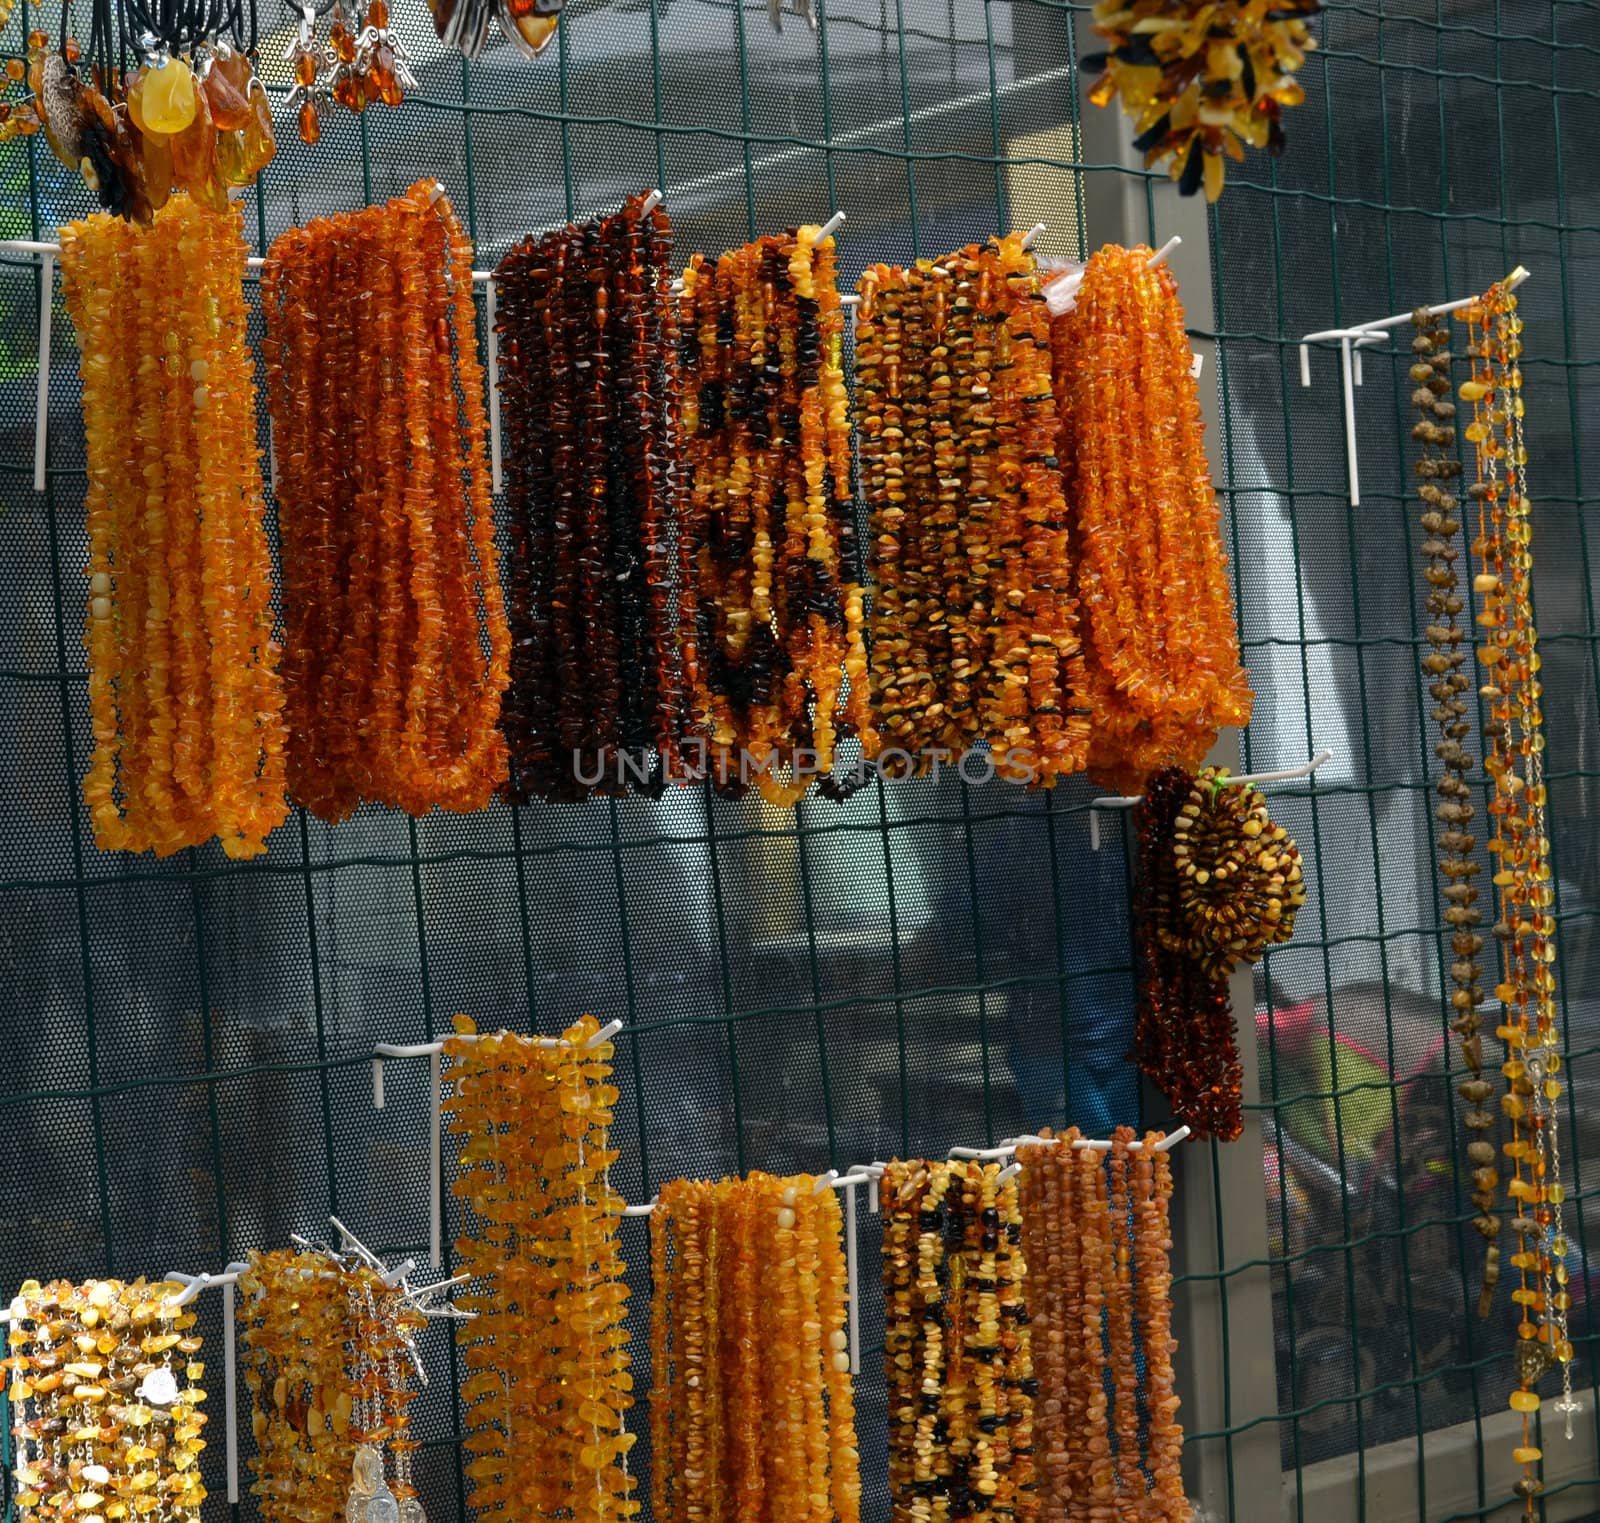 Beads and other handcrafted jewelry. Lithuanian national stone amber jewelery sold in city center.